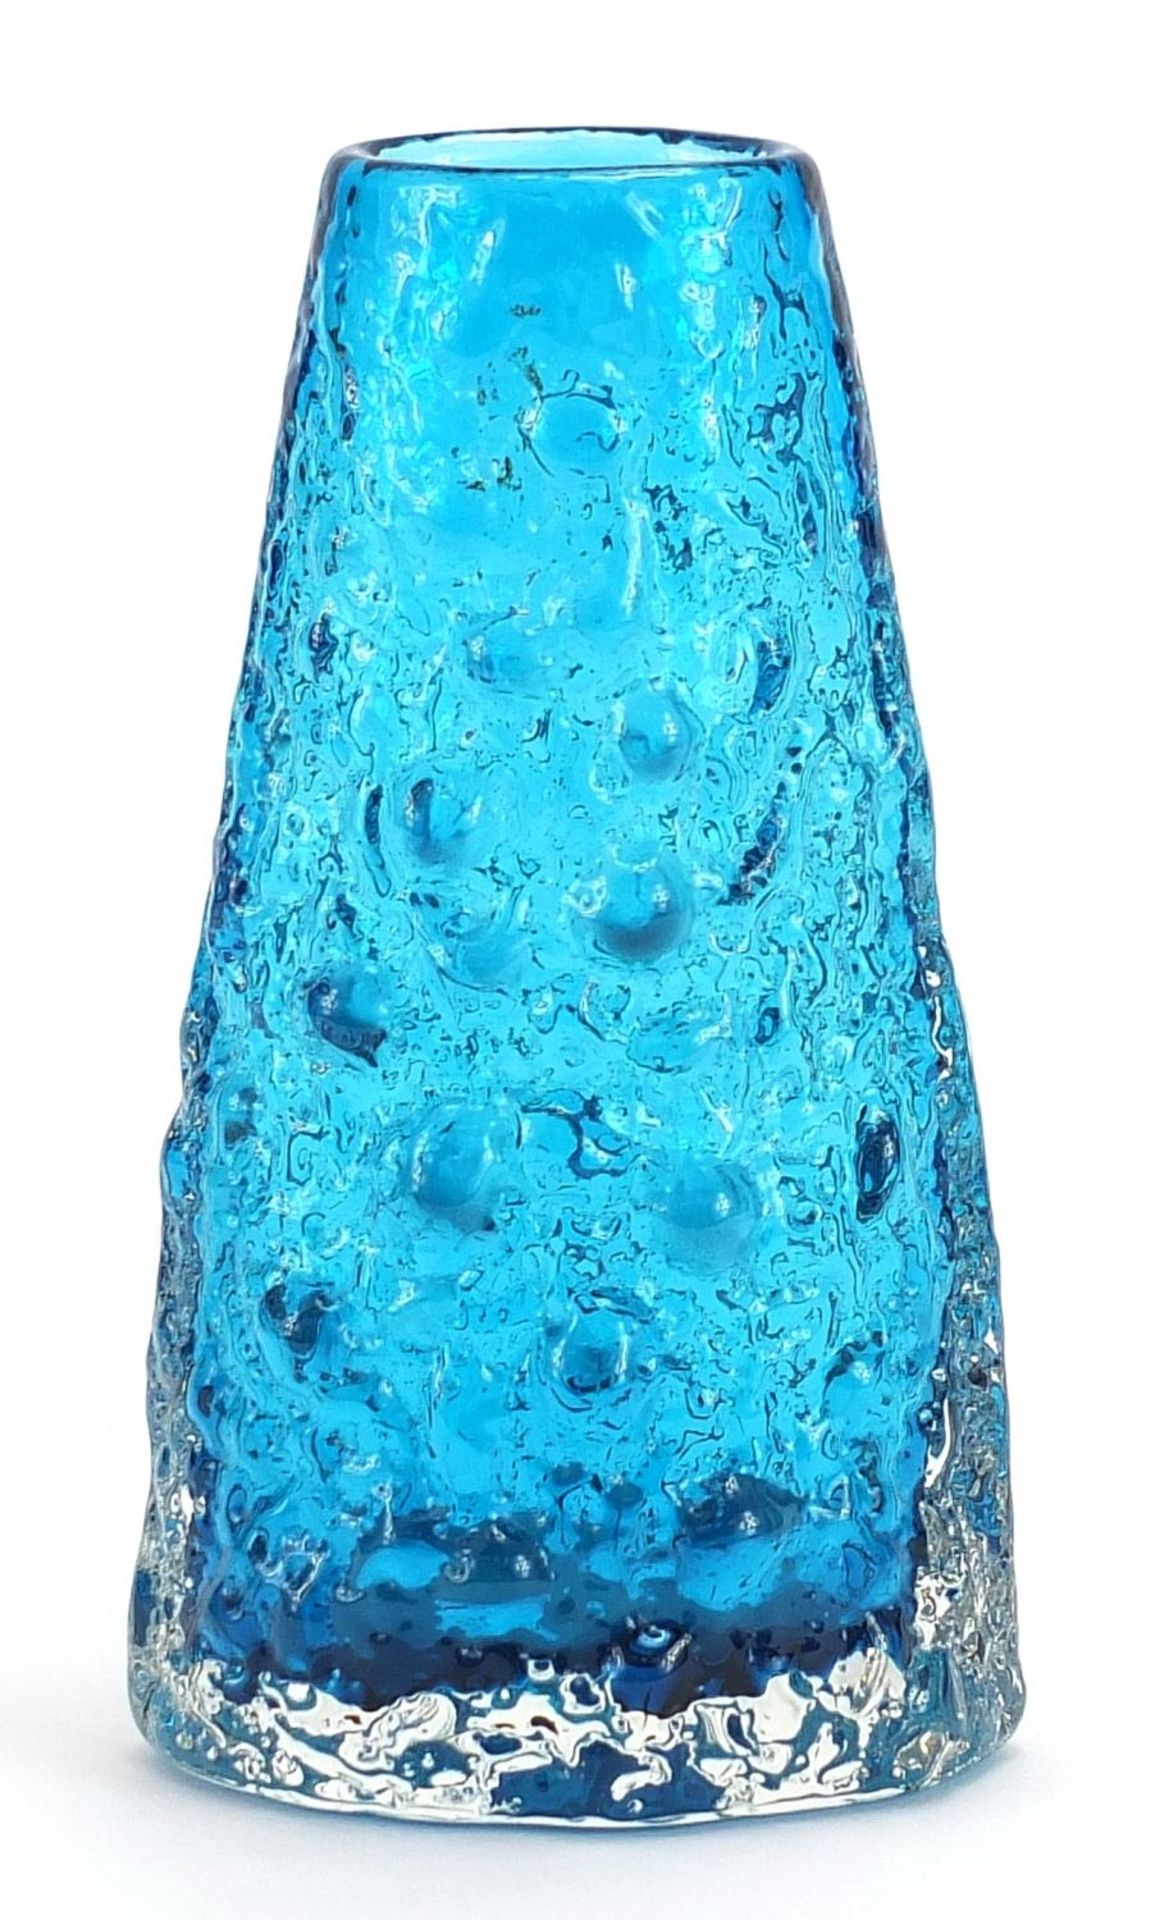 Geoffrey Baxter for Whitefriars, volcano glass vase in kingfisher blue, 18cm high